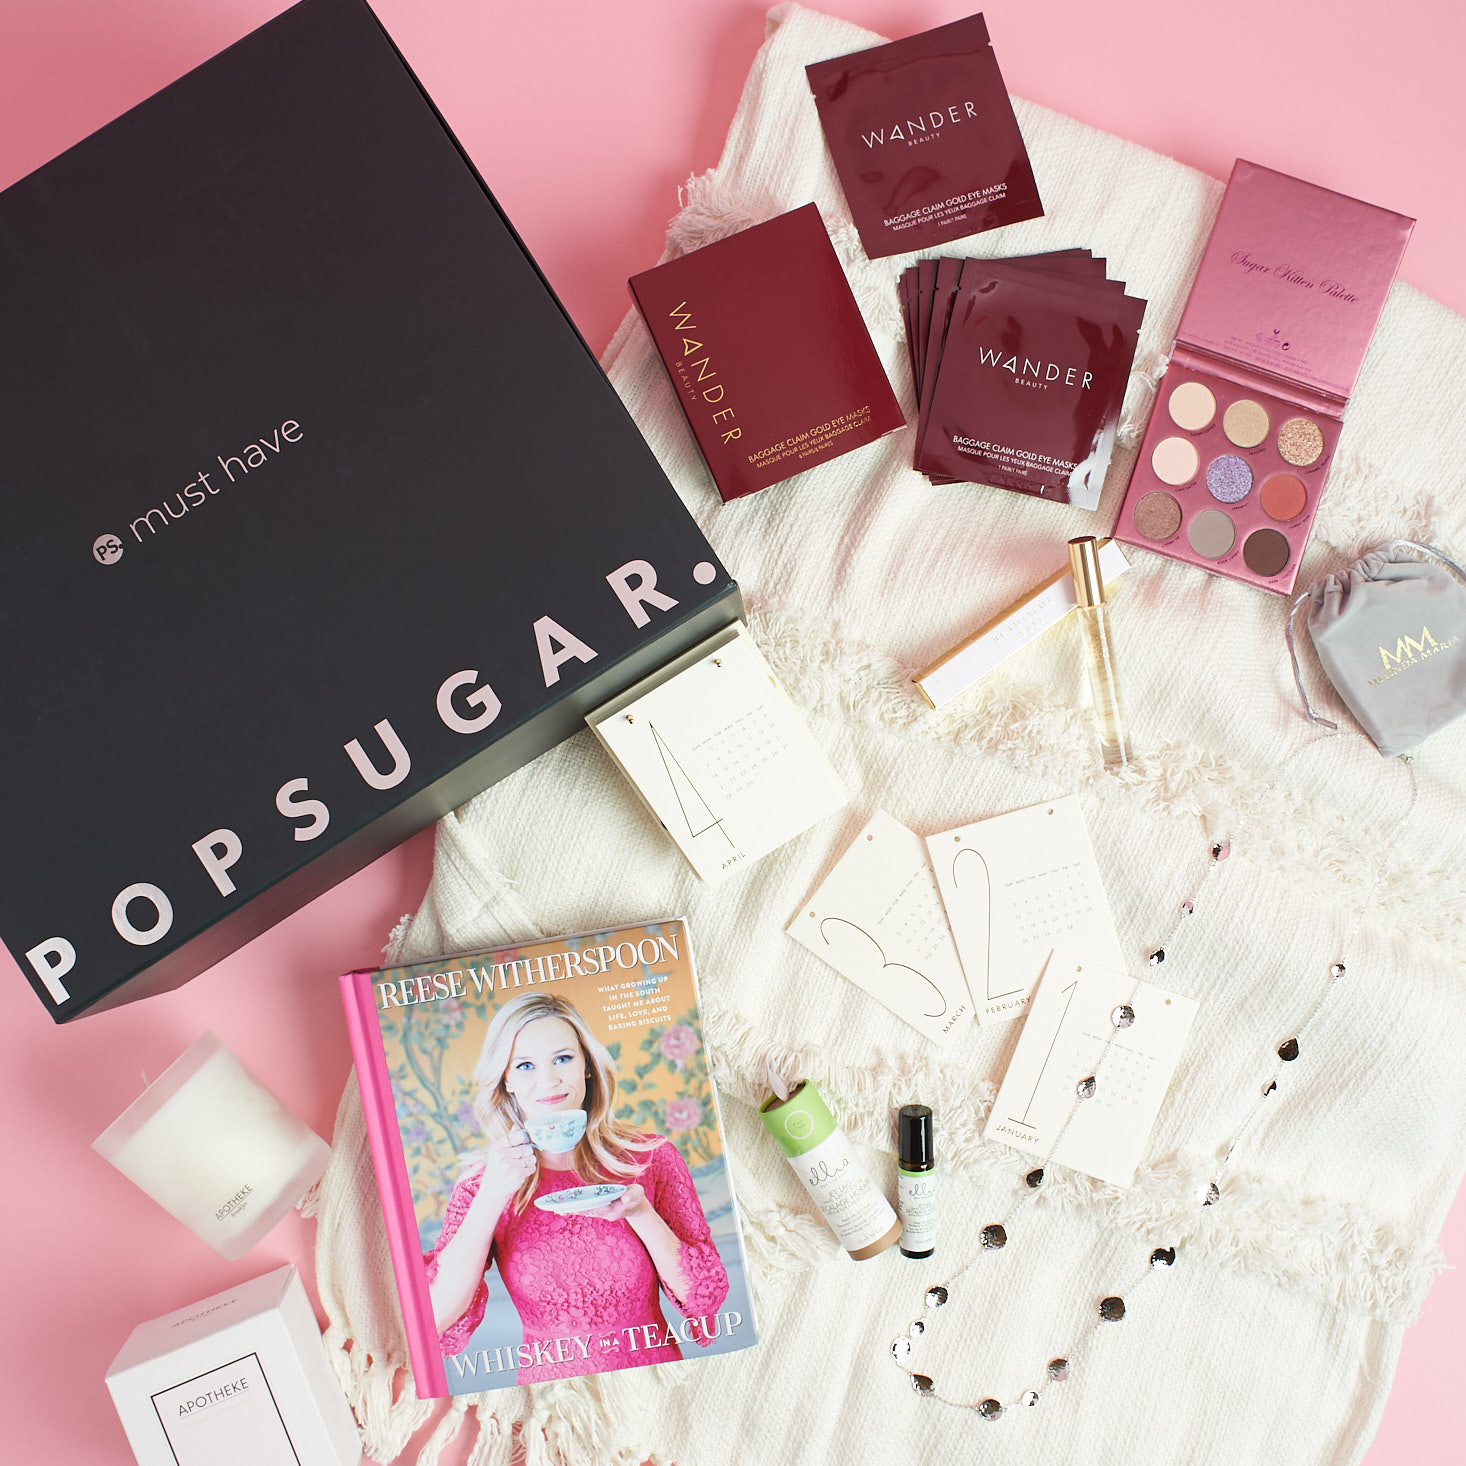 Best Cyber Monday Deals – Our Favorite Subscription Boxes for Women this Holiday Season!